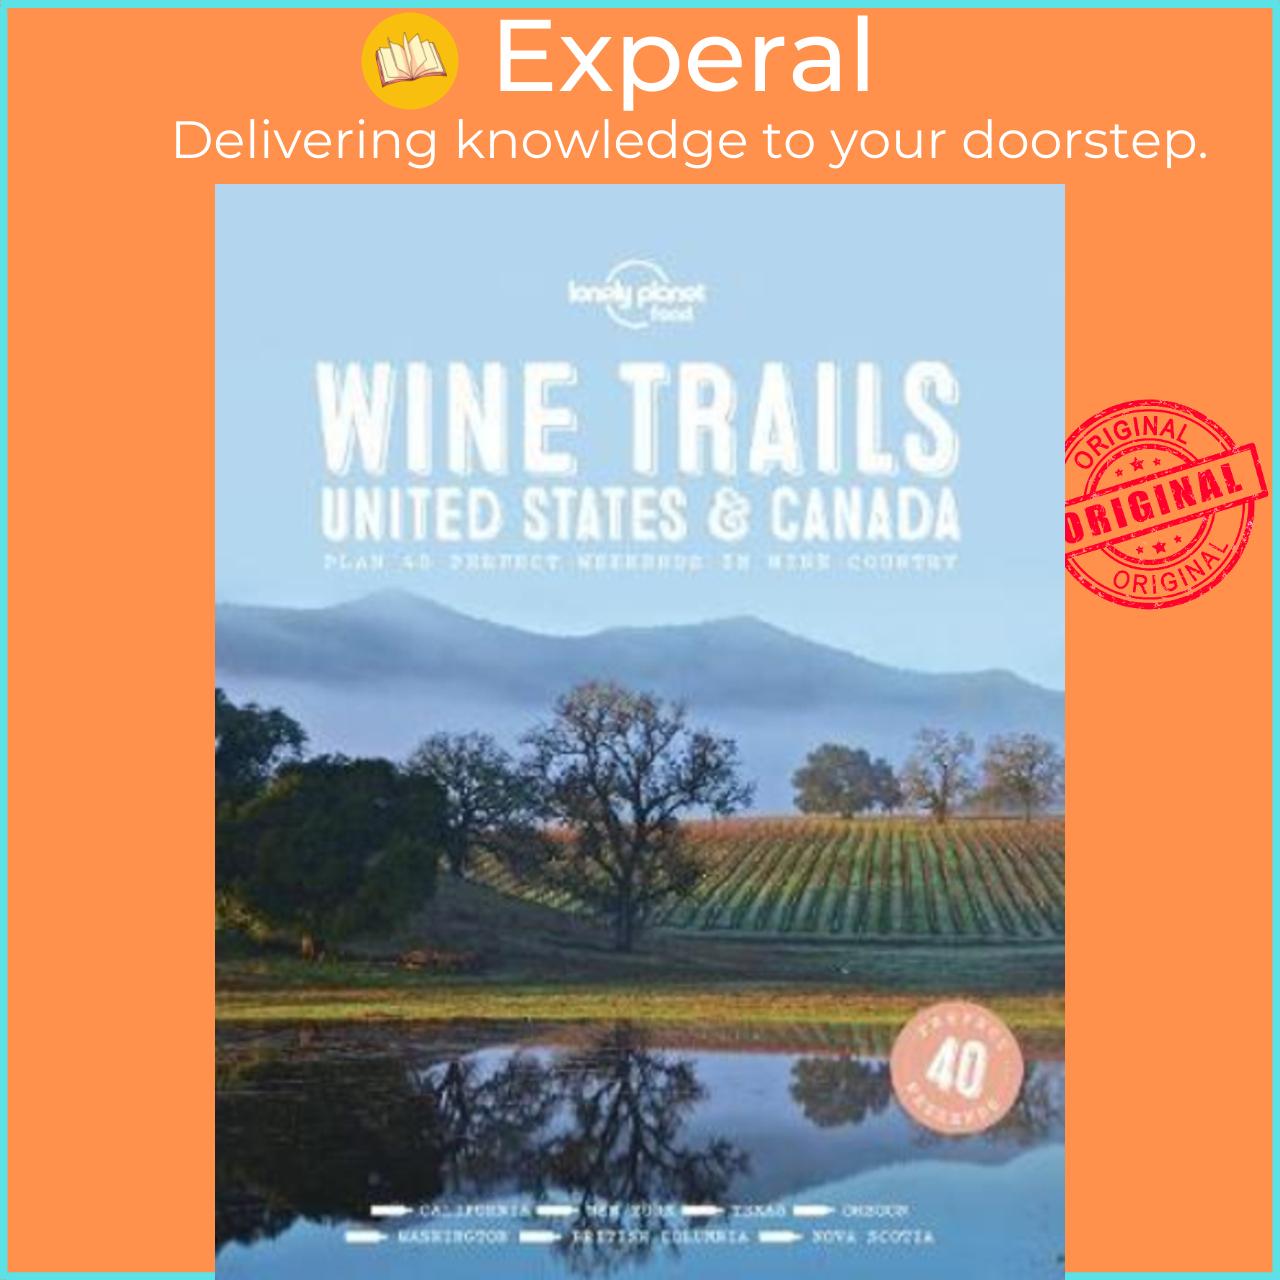 Sách - Wine Trails - USA & Canada by Lonely Planet (hardcover)